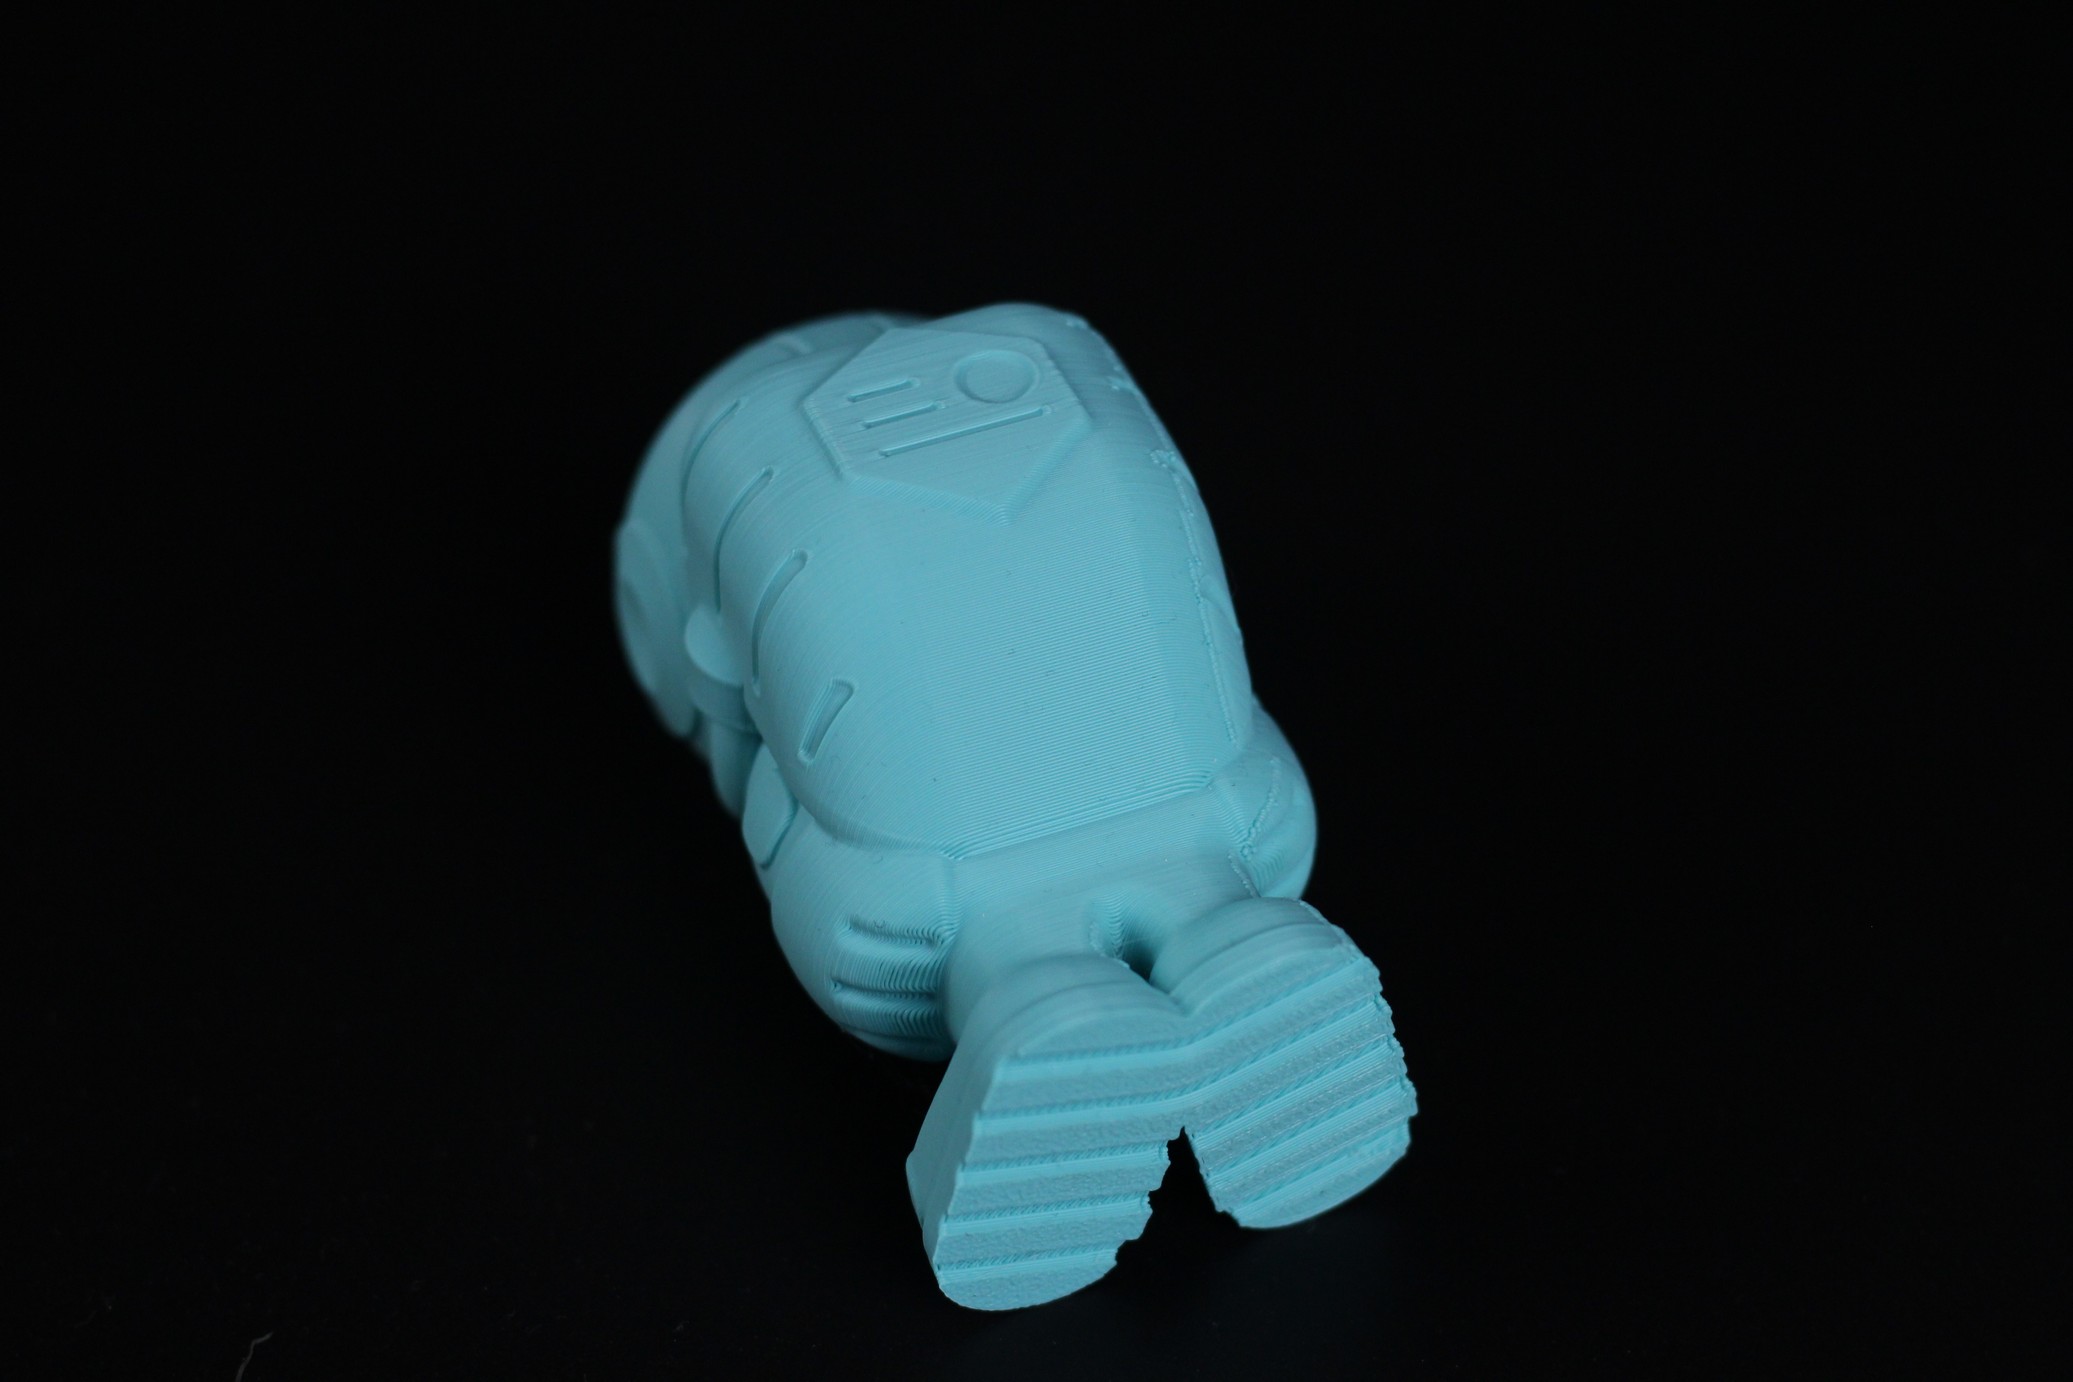 Phil A Ment printed on Anycubic Kobra Extrusion inconsistency 2 | Anycubic Kobra Review: The New Budget Standard